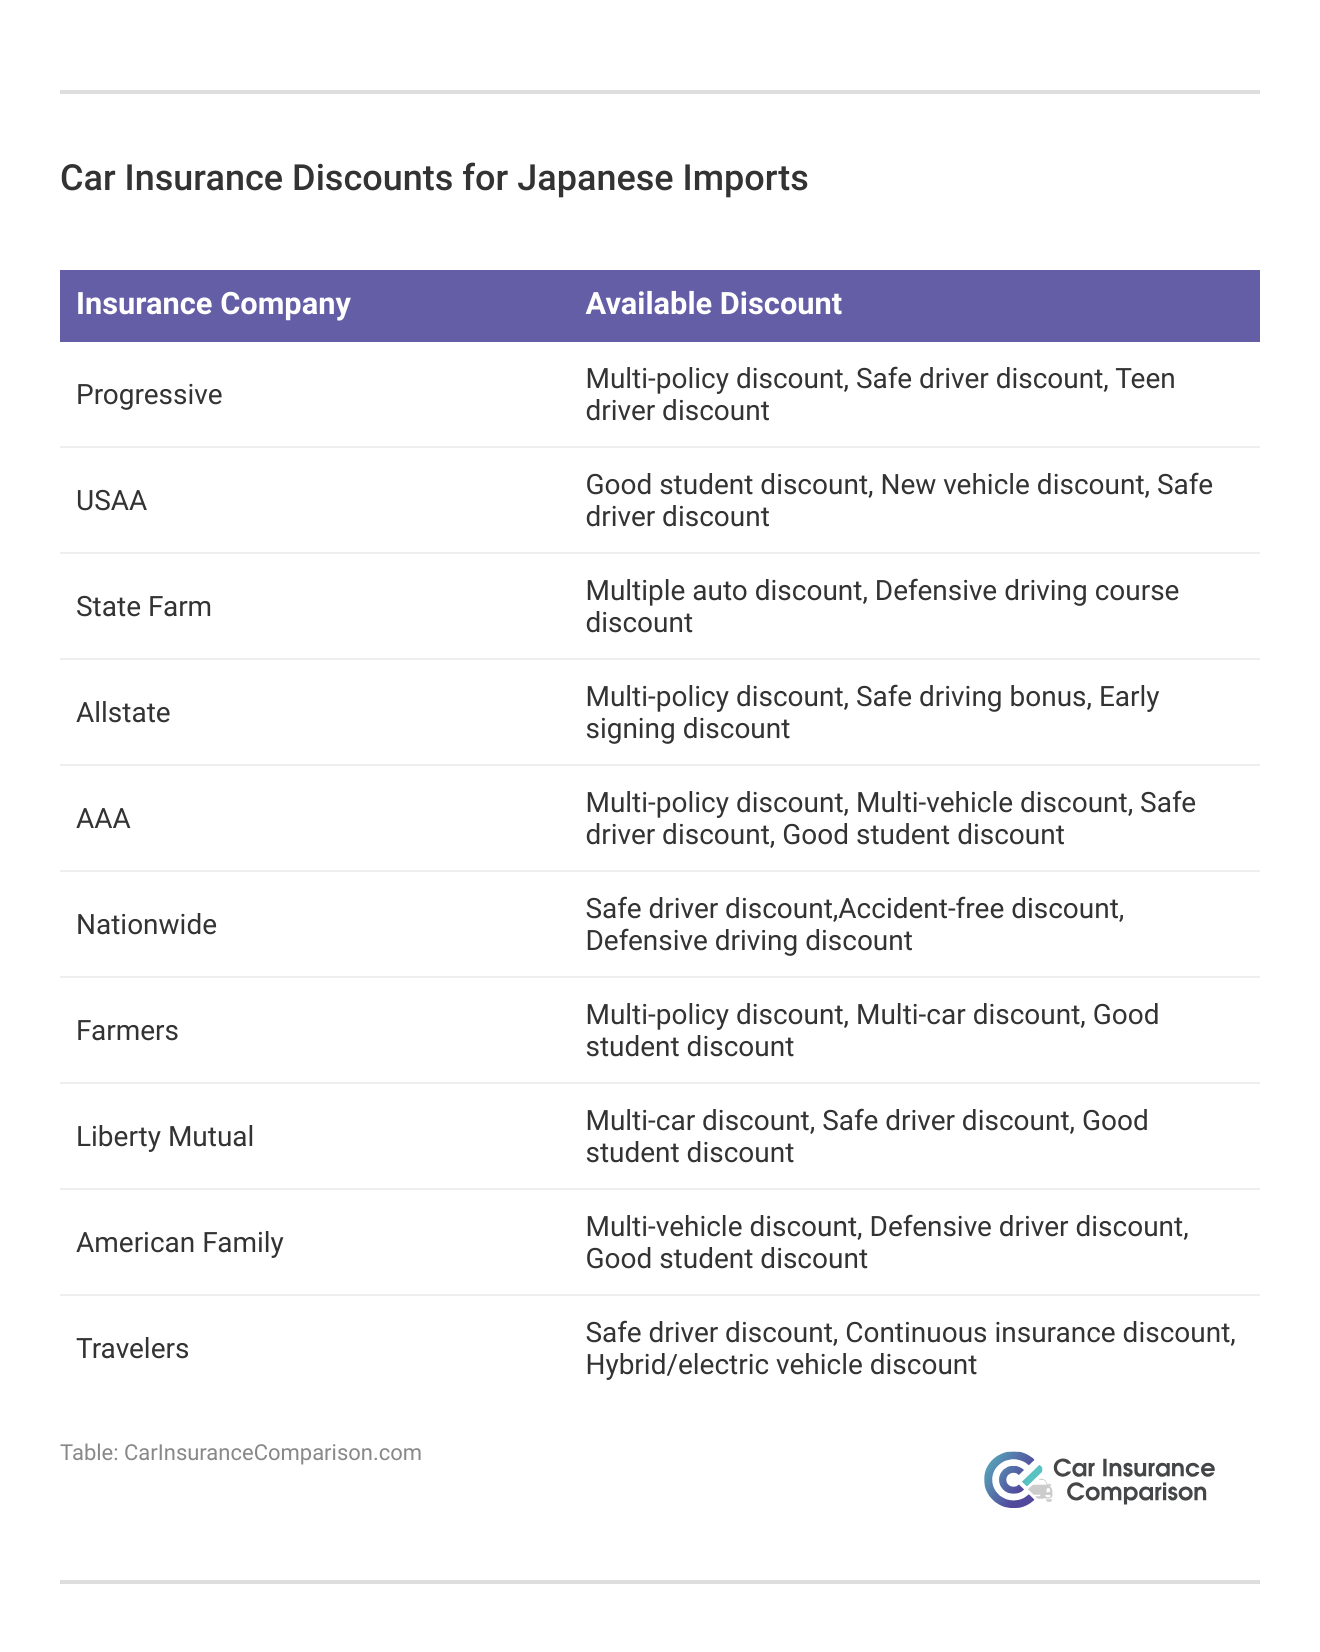 <h3>Car Insurance Discounts for Japanese Imports</h3>